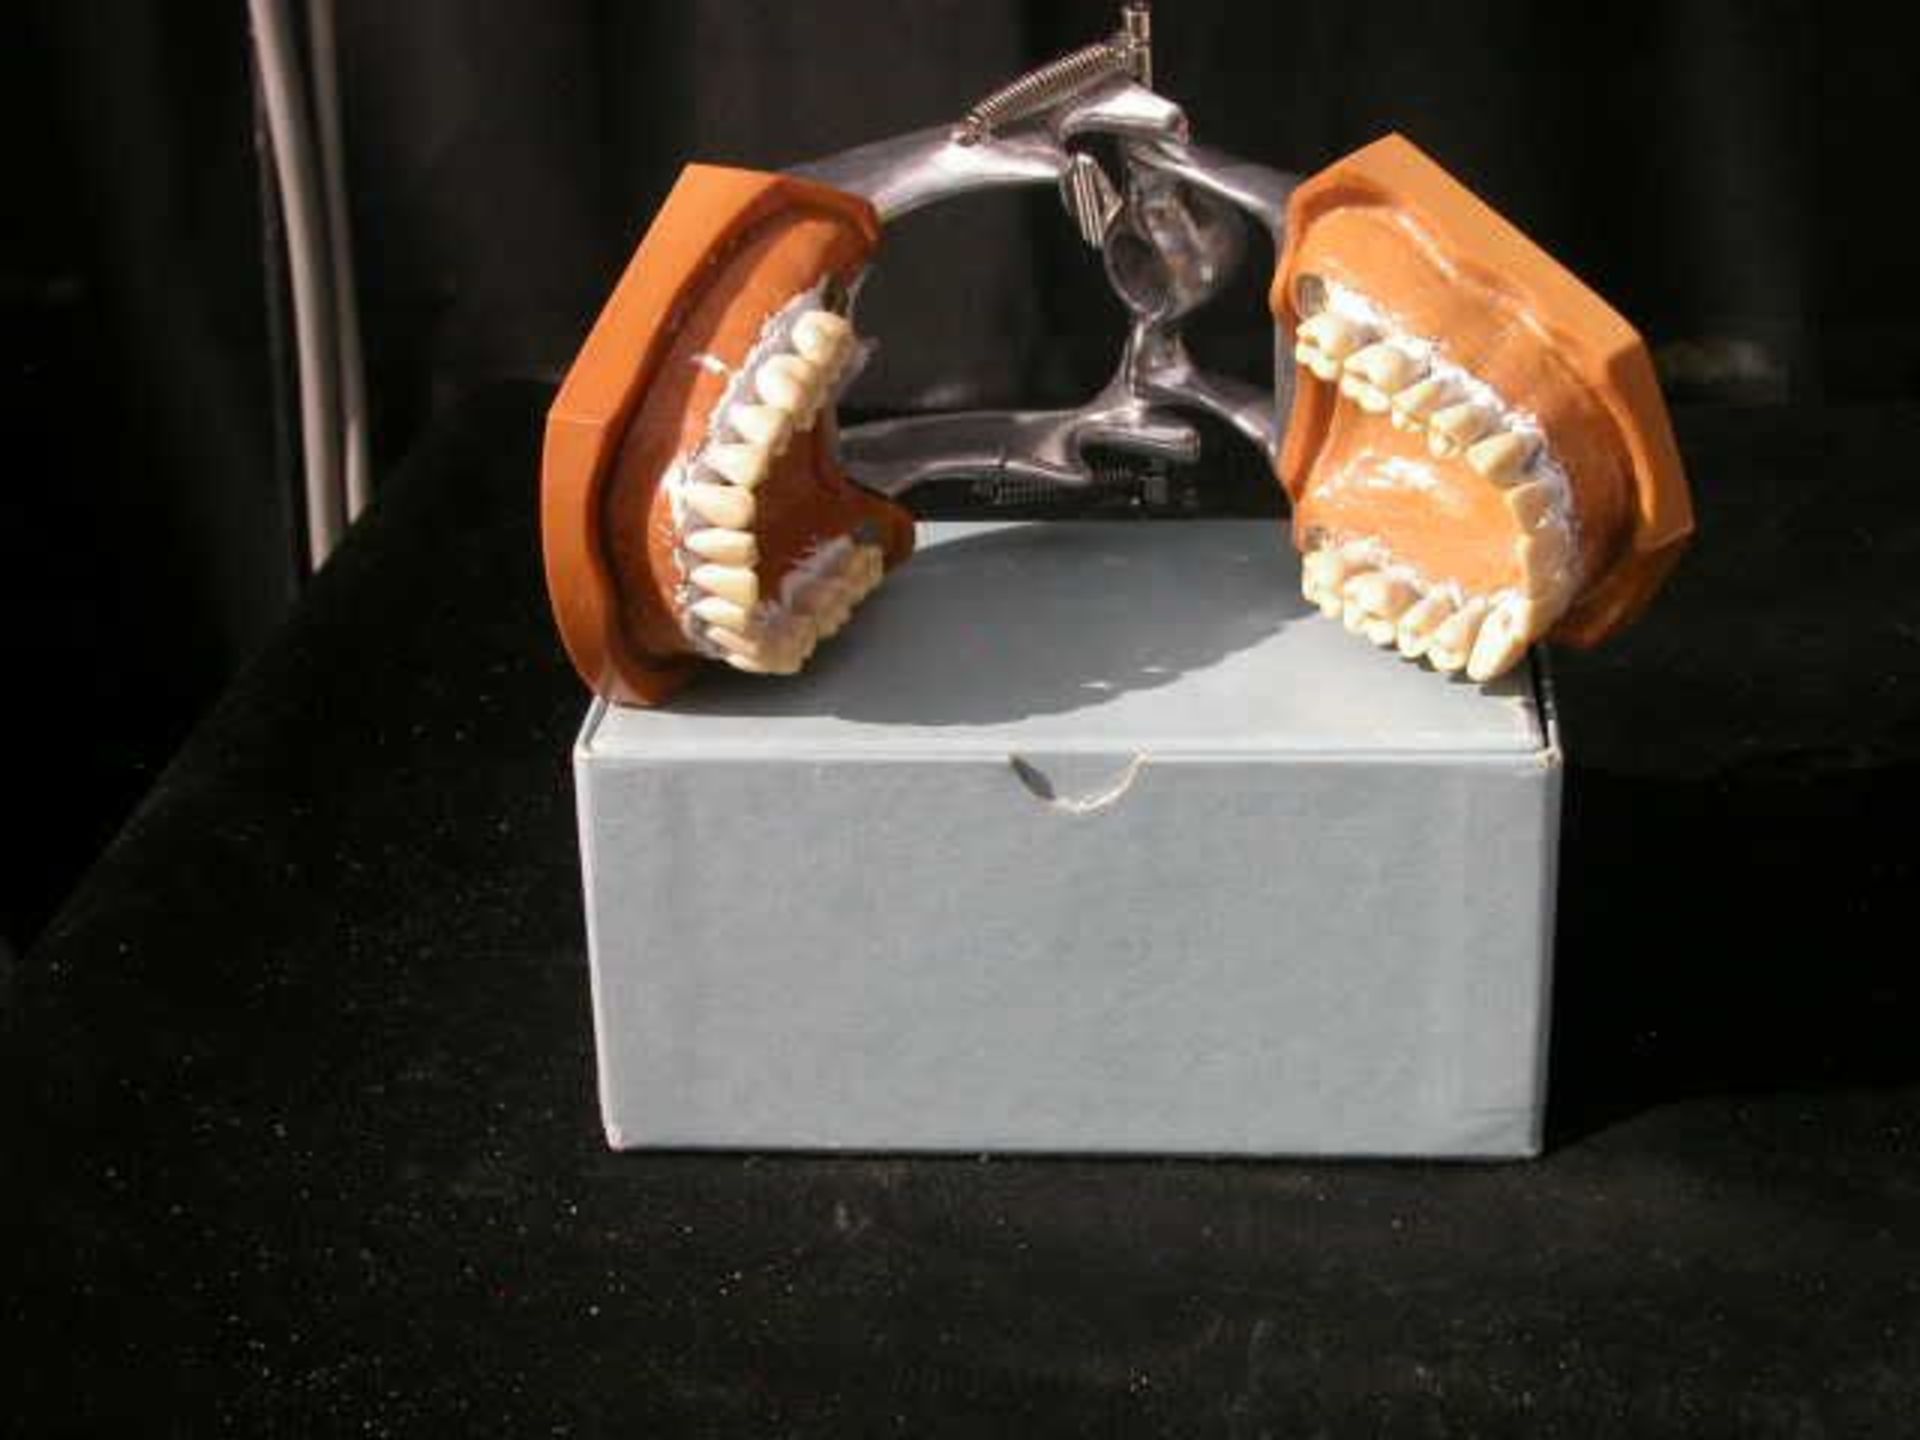 Columbia Dentiform Articulating Dental Model Removeable Teeth #5 4 Molars gone, Qty 1, 221087383782 - Image 3 of 3